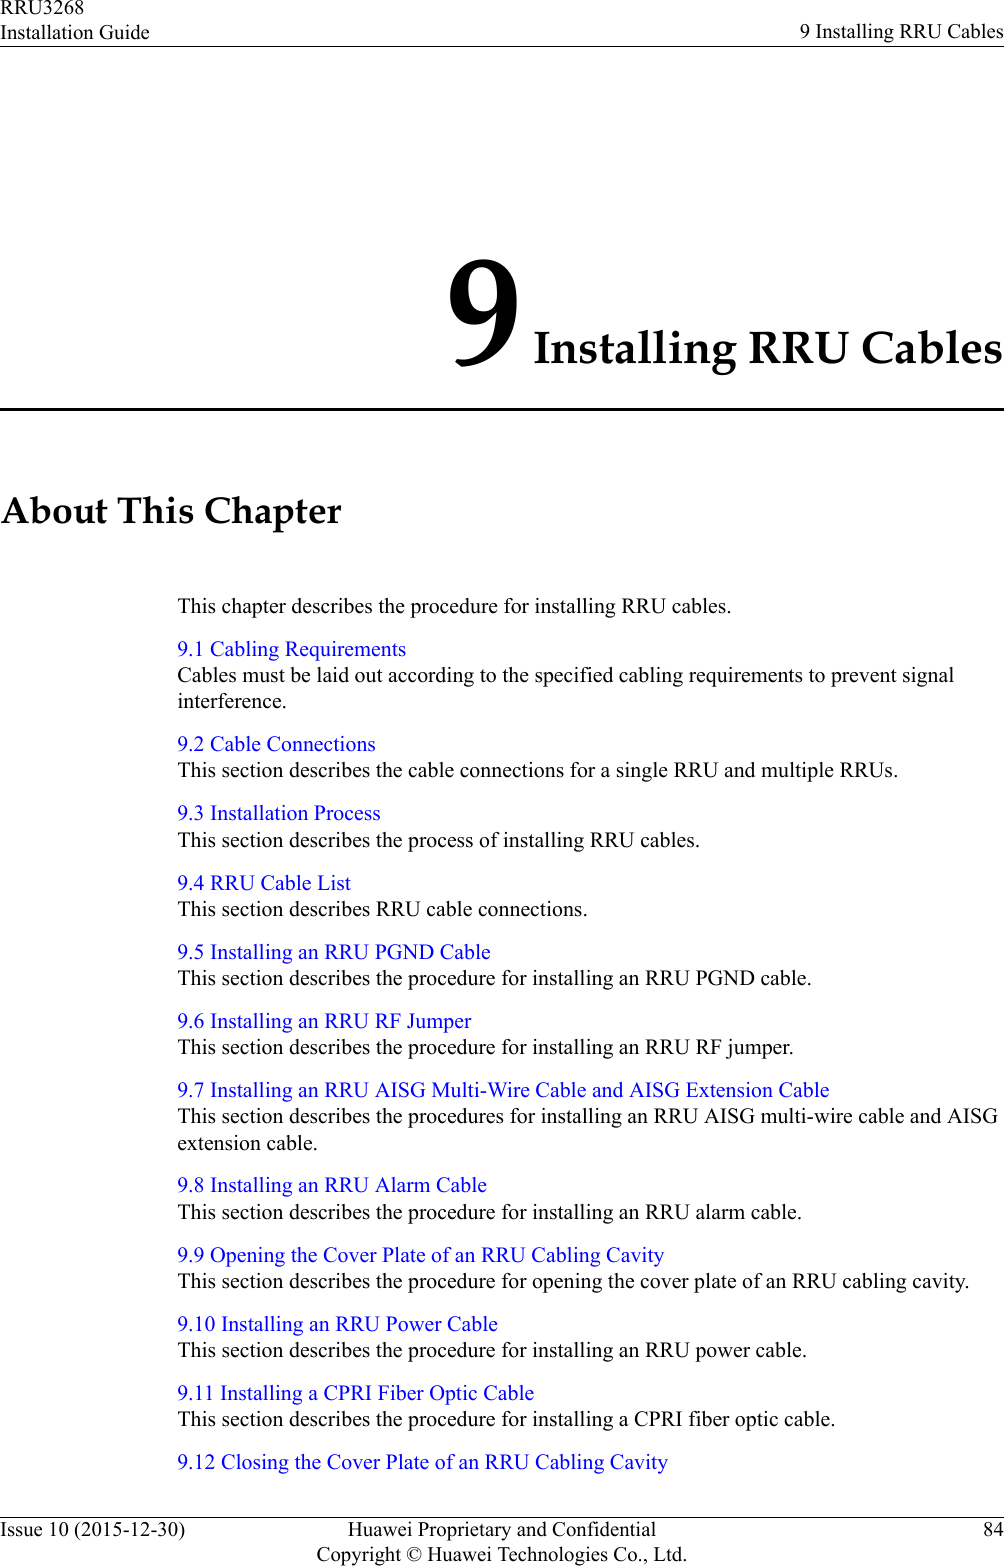 9 Installing RRU CablesAbout This ChapterThis chapter describes the procedure for installing RRU cables.9.1 Cabling RequirementsCables must be laid out according to the specified cabling requirements to prevent signalinterference.9.2 Cable ConnectionsThis section describes the cable connections for a single RRU and multiple RRUs.9.3 Installation ProcessThis section describes the process of installing RRU cables.9.4 RRU Cable ListThis section describes RRU cable connections.9.5 Installing an RRU PGND CableThis section describes the procedure for installing an RRU PGND cable.9.6 Installing an RRU RF JumperThis section describes the procedure for installing an RRU RF jumper.9.7 Installing an RRU AISG Multi-Wire Cable and AISG Extension CableThis section describes the procedures for installing an RRU AISG multi-wire cable and AISGextension cable.9.8 Installing an RRU Alarm CableThis section describes the procedure for installing an RRU alarm cable.9.9 Opening the Cover Plate of an RRU Cabling CavityThis section describes the procedure for opening the cover plate of an RRU cabling cavity.9.10 Installing an RRU Power CableThis section describes the procedure for installing an RRU power cable.9.11 Installing a CPRI Fiber Optic CableThis section describes the procedure for installing a CPRI fiber optic cable.9.12 Closing the Cover Plate of an RRU Cabling CavityRRU3268Installation Guide 9 Installing RRU CablesIssue 10 (2015-12-30) Huawei Proprietary and ConfidentialCopyright © Huawei Technologies Co., Ltd.84